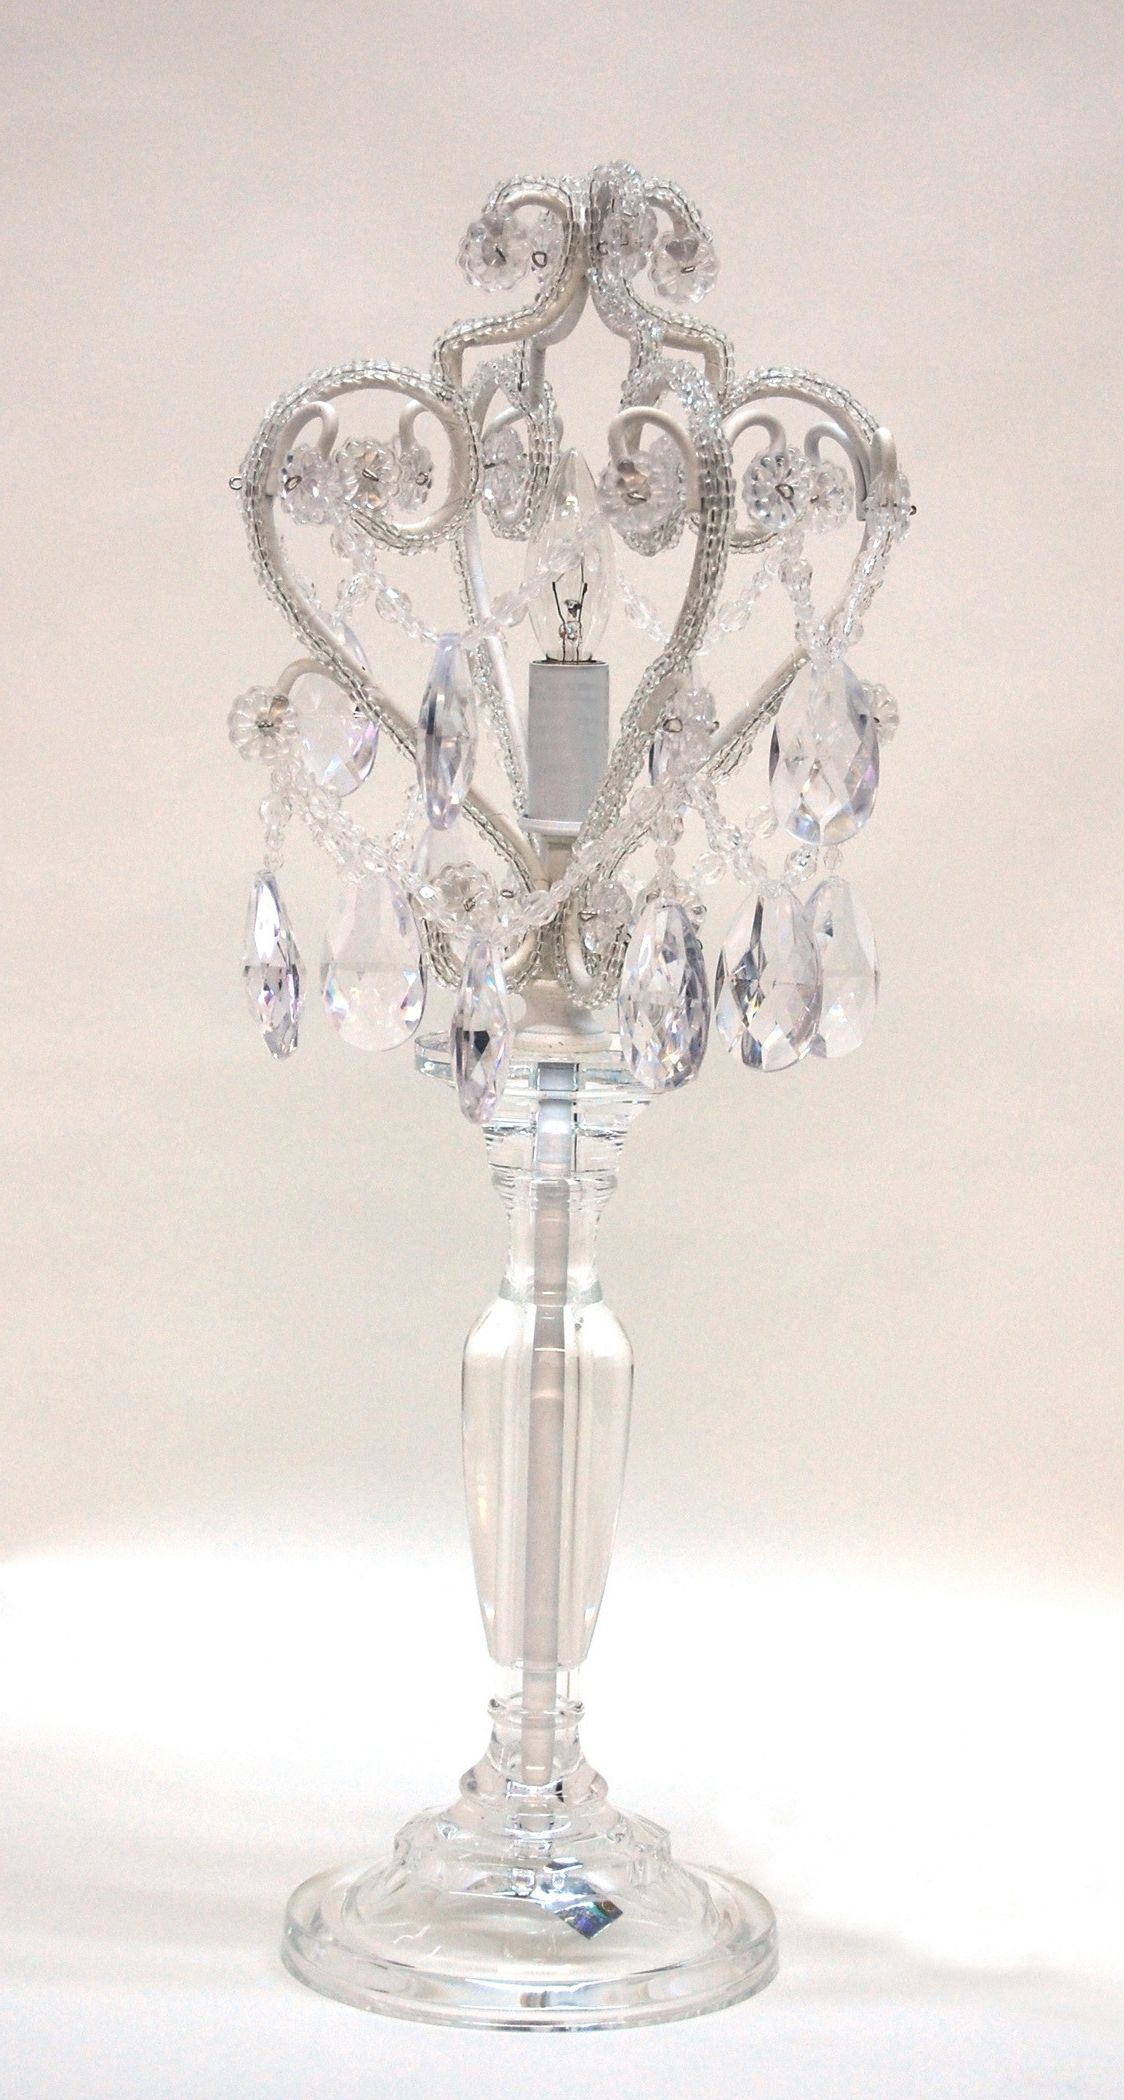 Popular Chandeliers : Small Crystal Chandelier New Nightstands Crystal Glass In Small Crystal Chandelier Table Lamps (View 8 of 20)